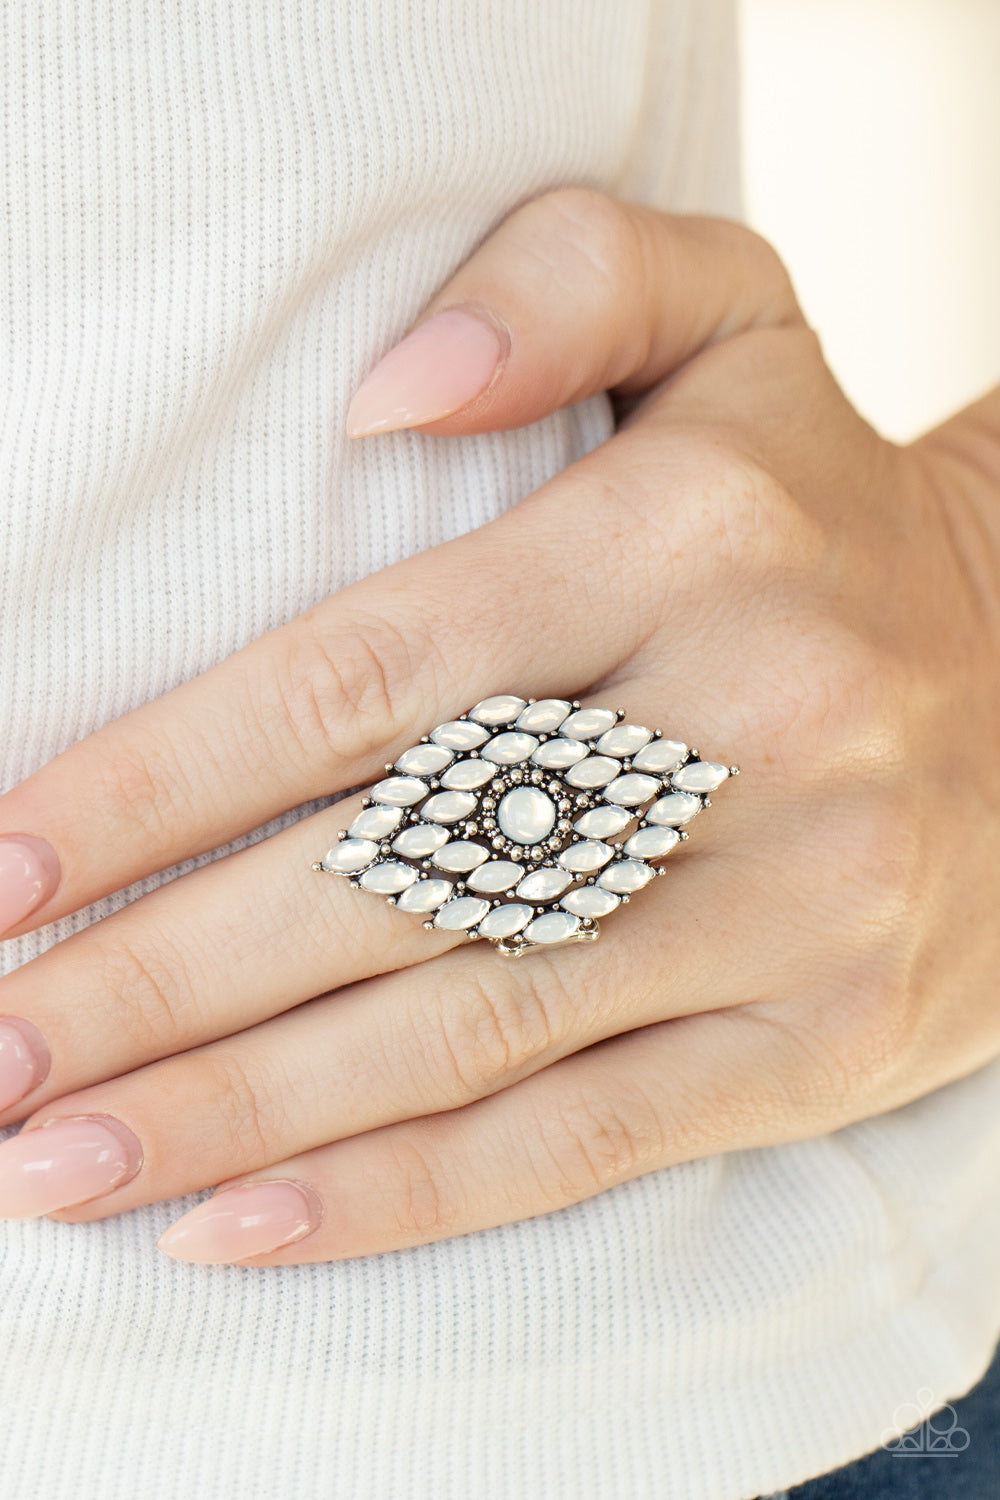 Incandescently Irresistible Ring - White